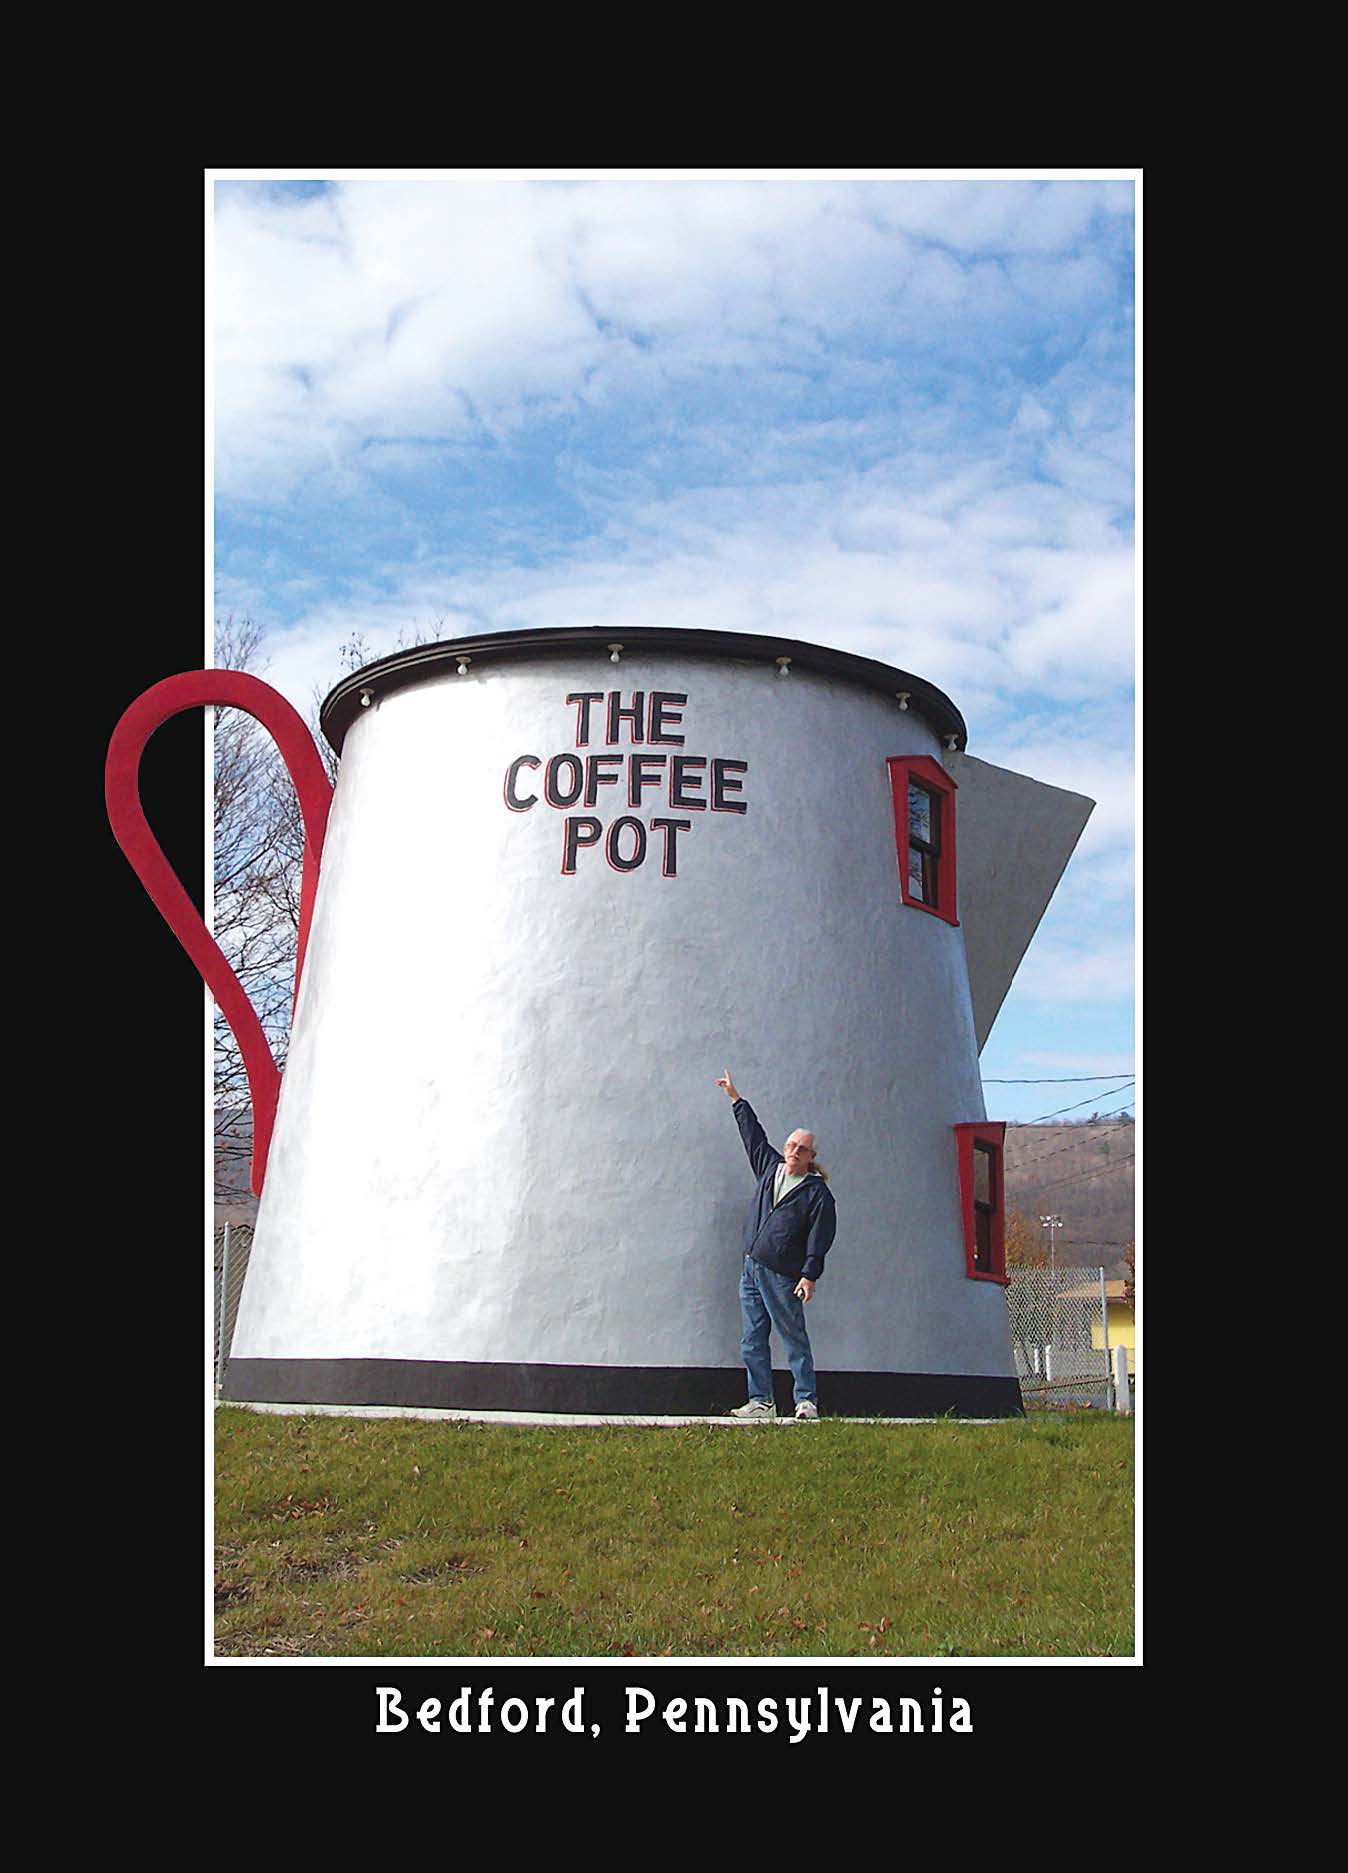 Giant Coffee Pot Attractions Across the U.S.